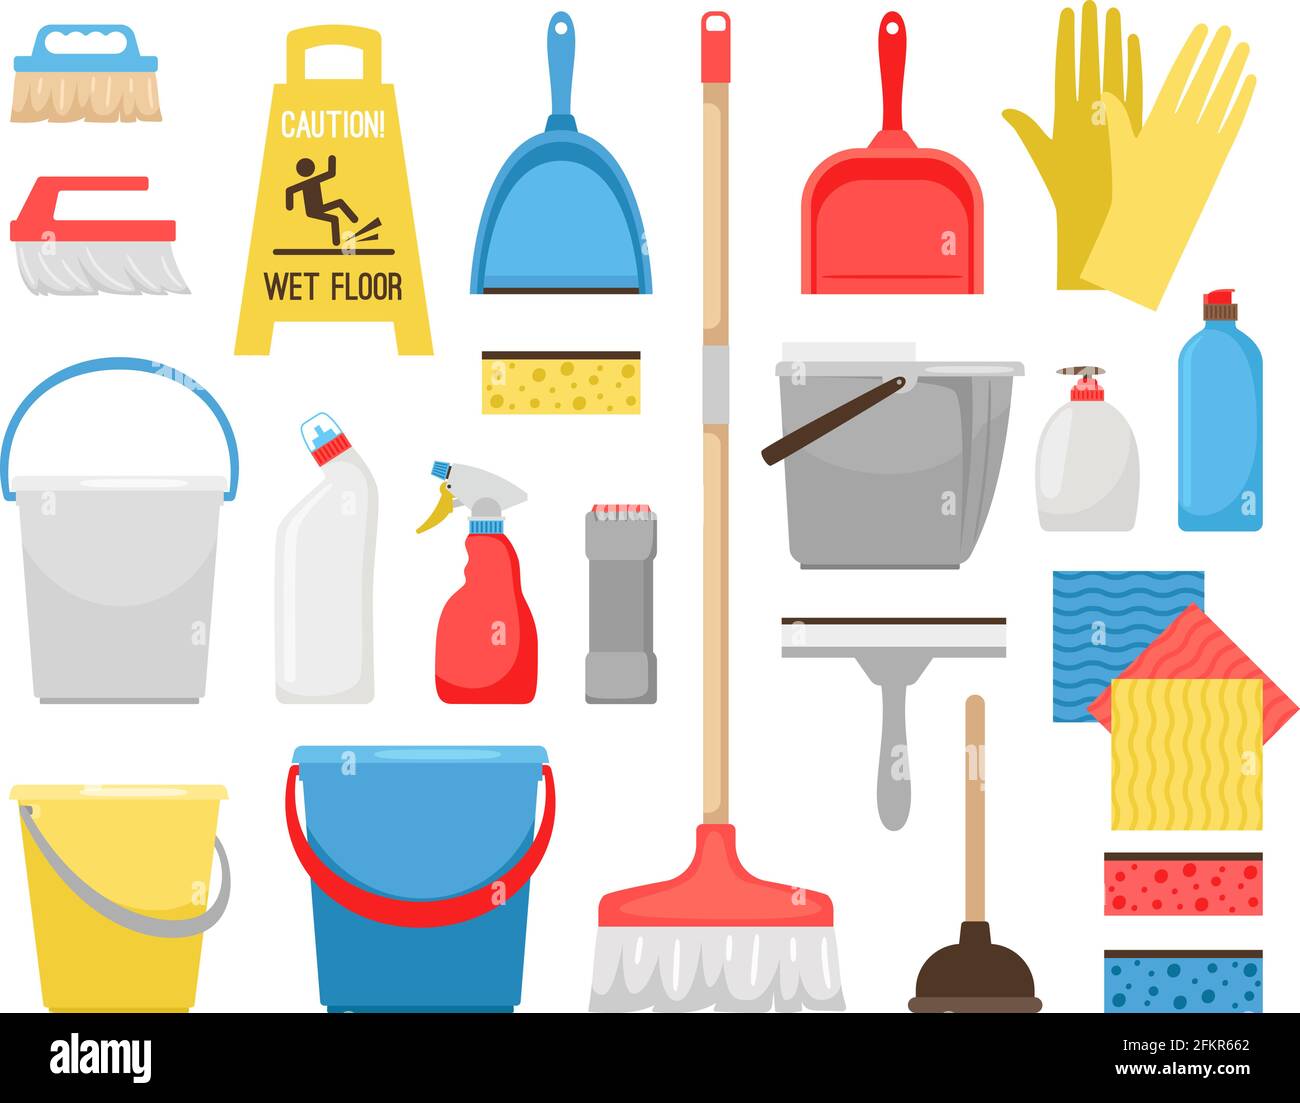 https://c8.alamy.com/comp/2FKR662/householding-cleaning-tools-housekeeping-tool-icons-for-home-and-office-cleaning-bucket-and-foam-detergent-bottles-and-washing-supplies-sweeping-brush-and-bucket-vector-illustration-2FKR662.jpg